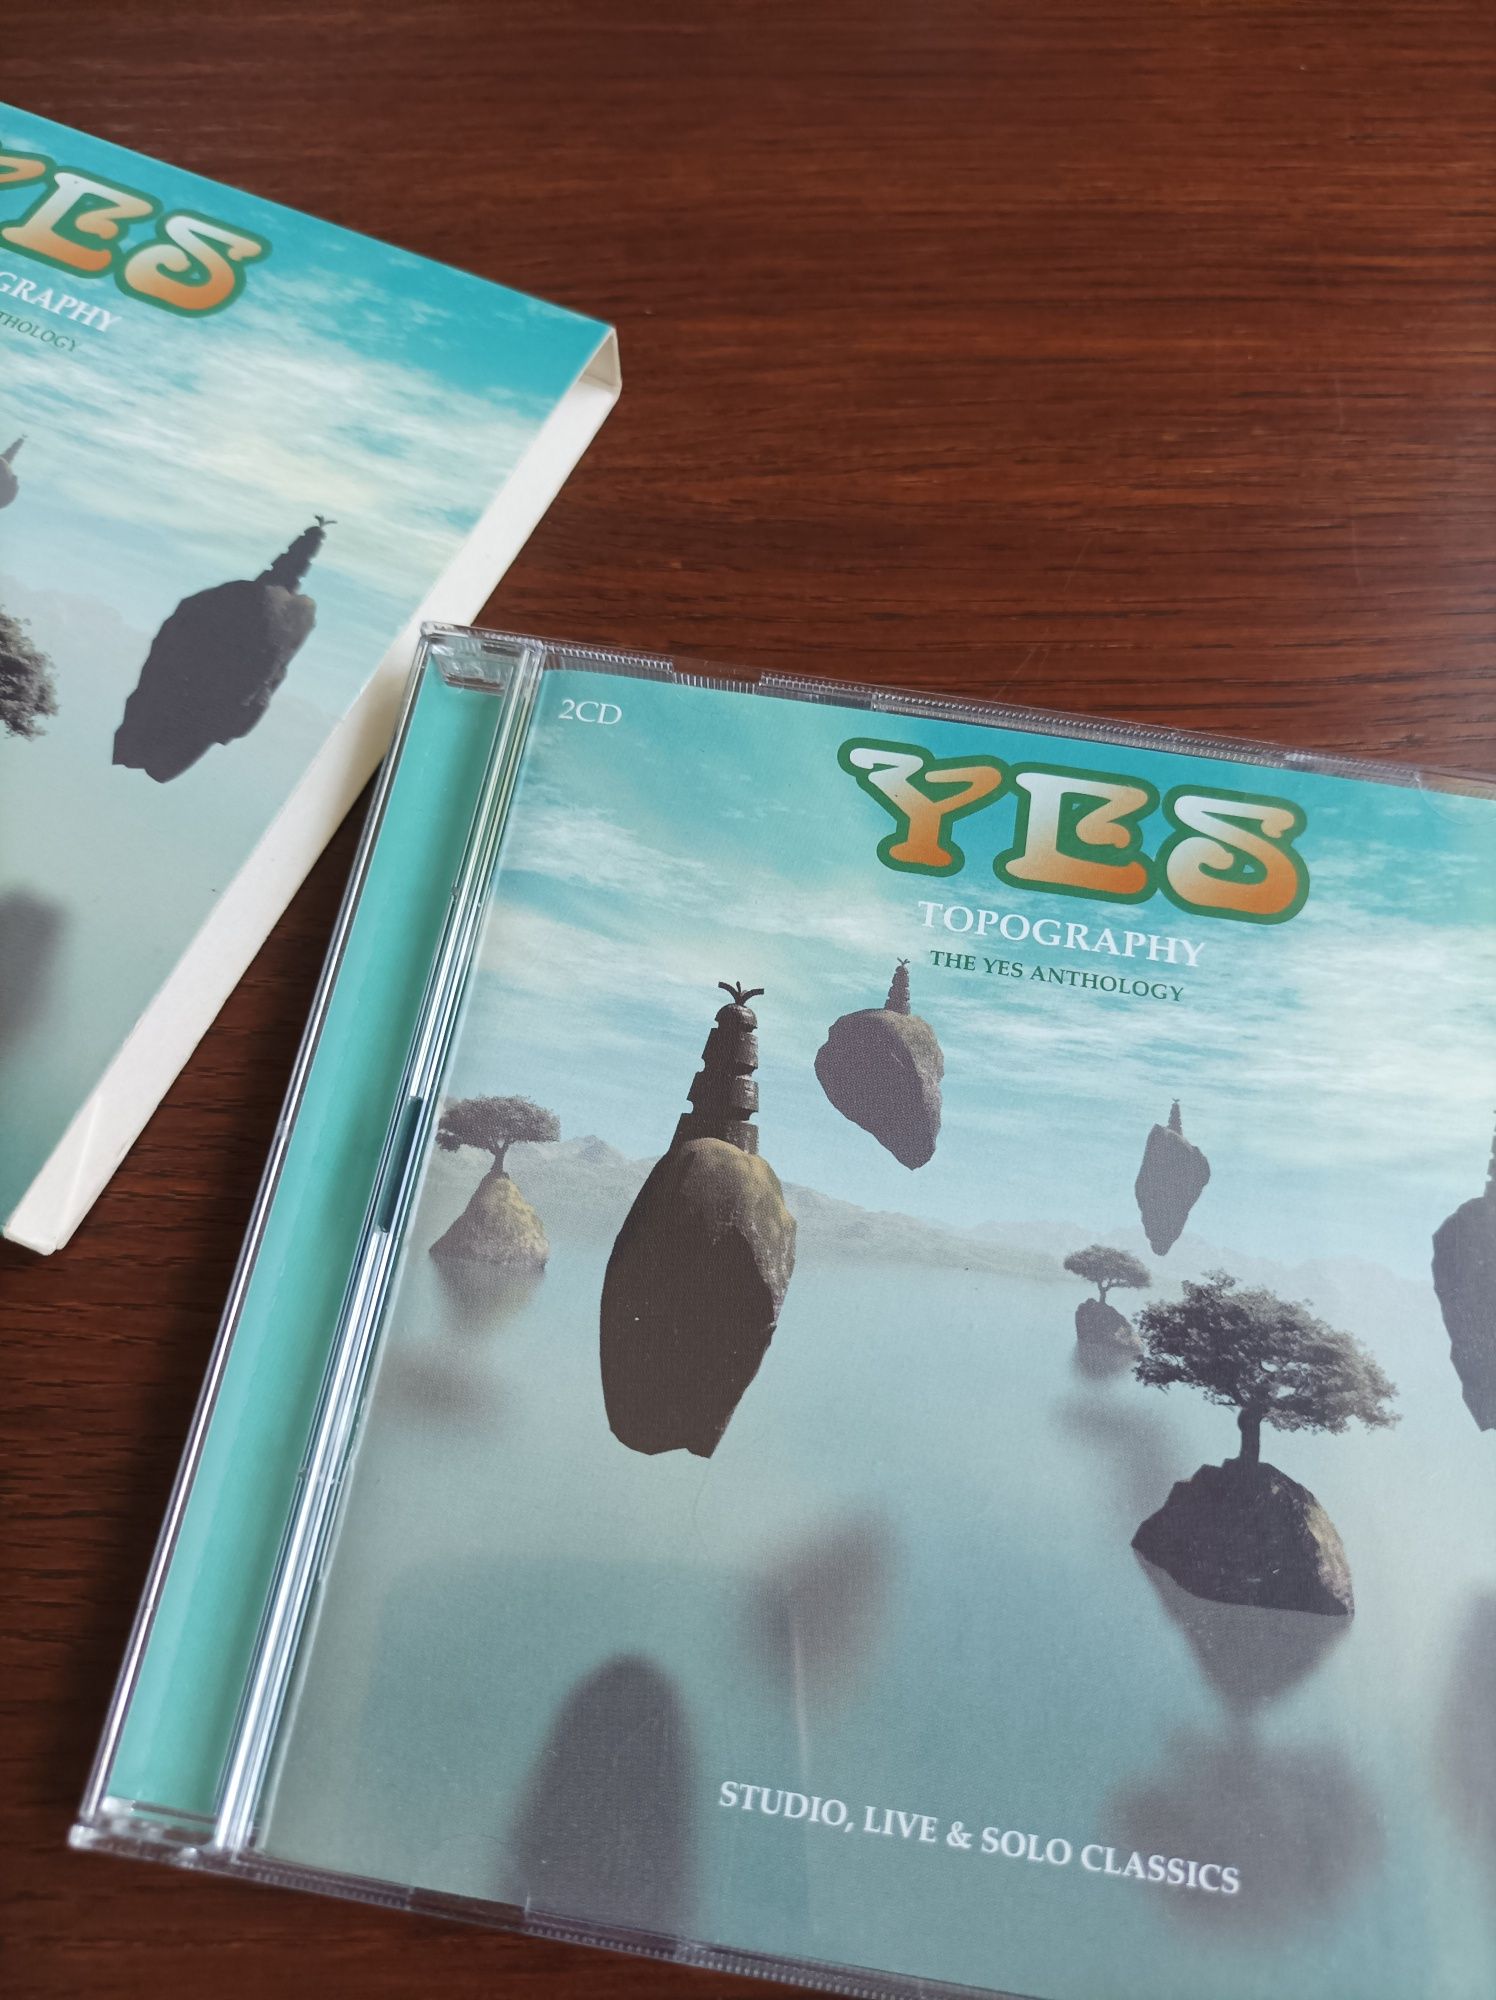 Yes - Topography the Yes anthology